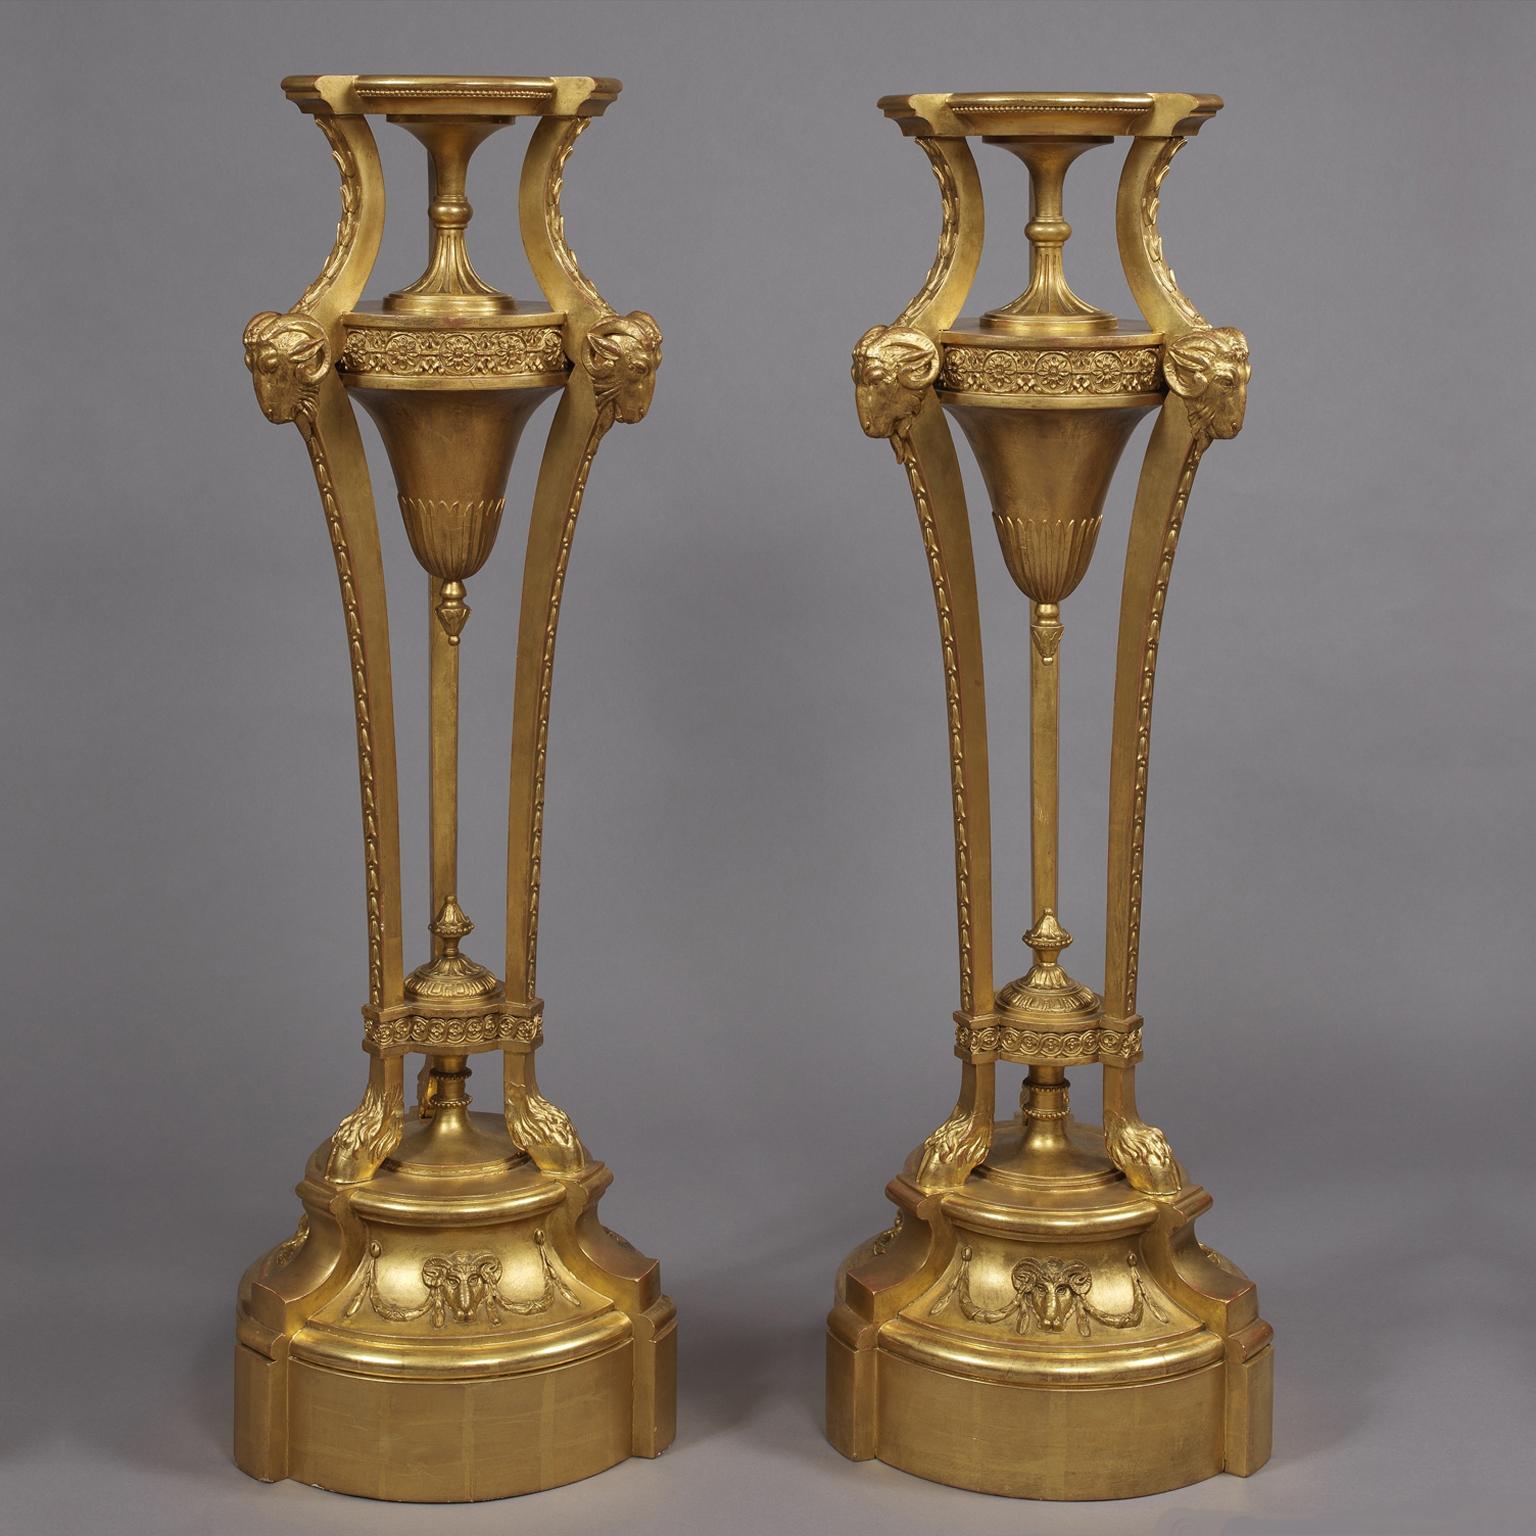 A pair of giltwood and Gesso pedestals, in the manner of Robert Adam. 

Each pedestal having a circular top with a waisted fluted socle, on ram's-mask headed acanthus-carved fluted monopodia, raised on a tiform-plinth with lion's paw feet.